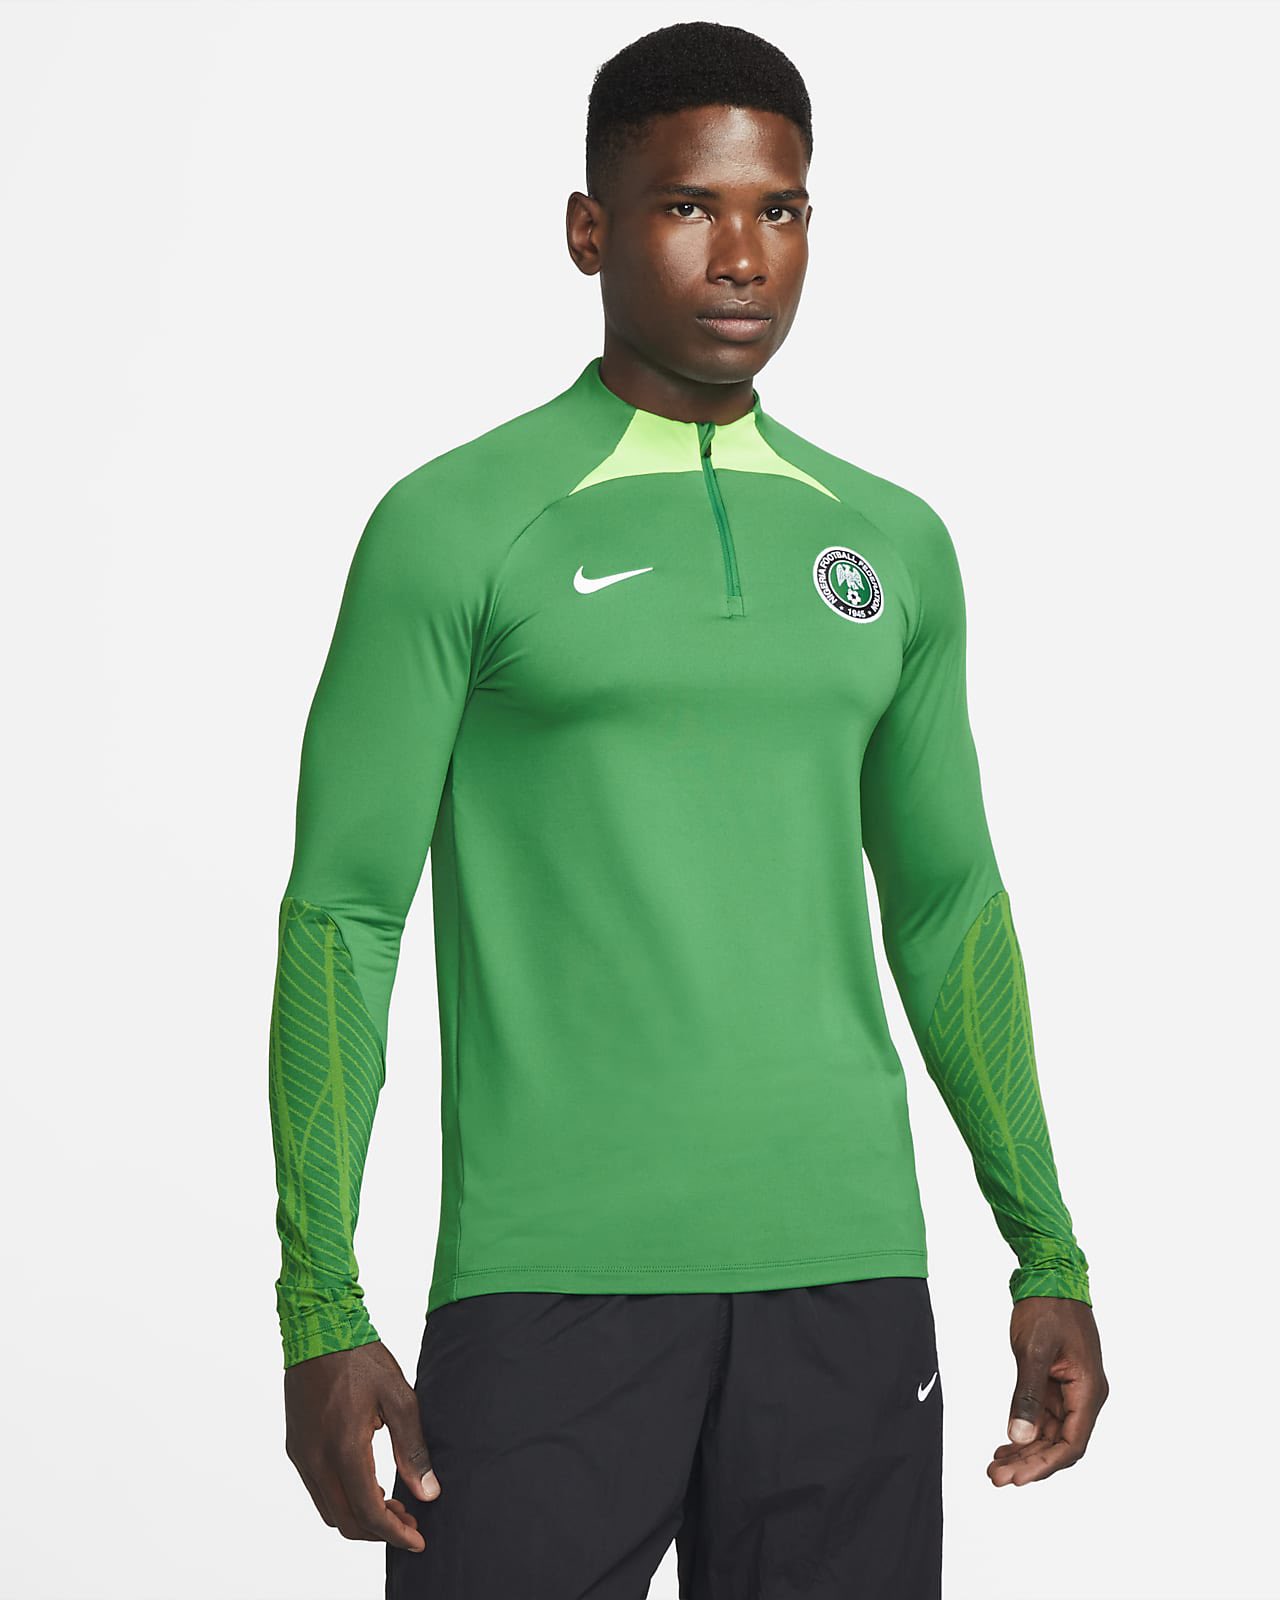 New Nigeria Football Kit From Nike - How Would You Rate This? (Photos ...